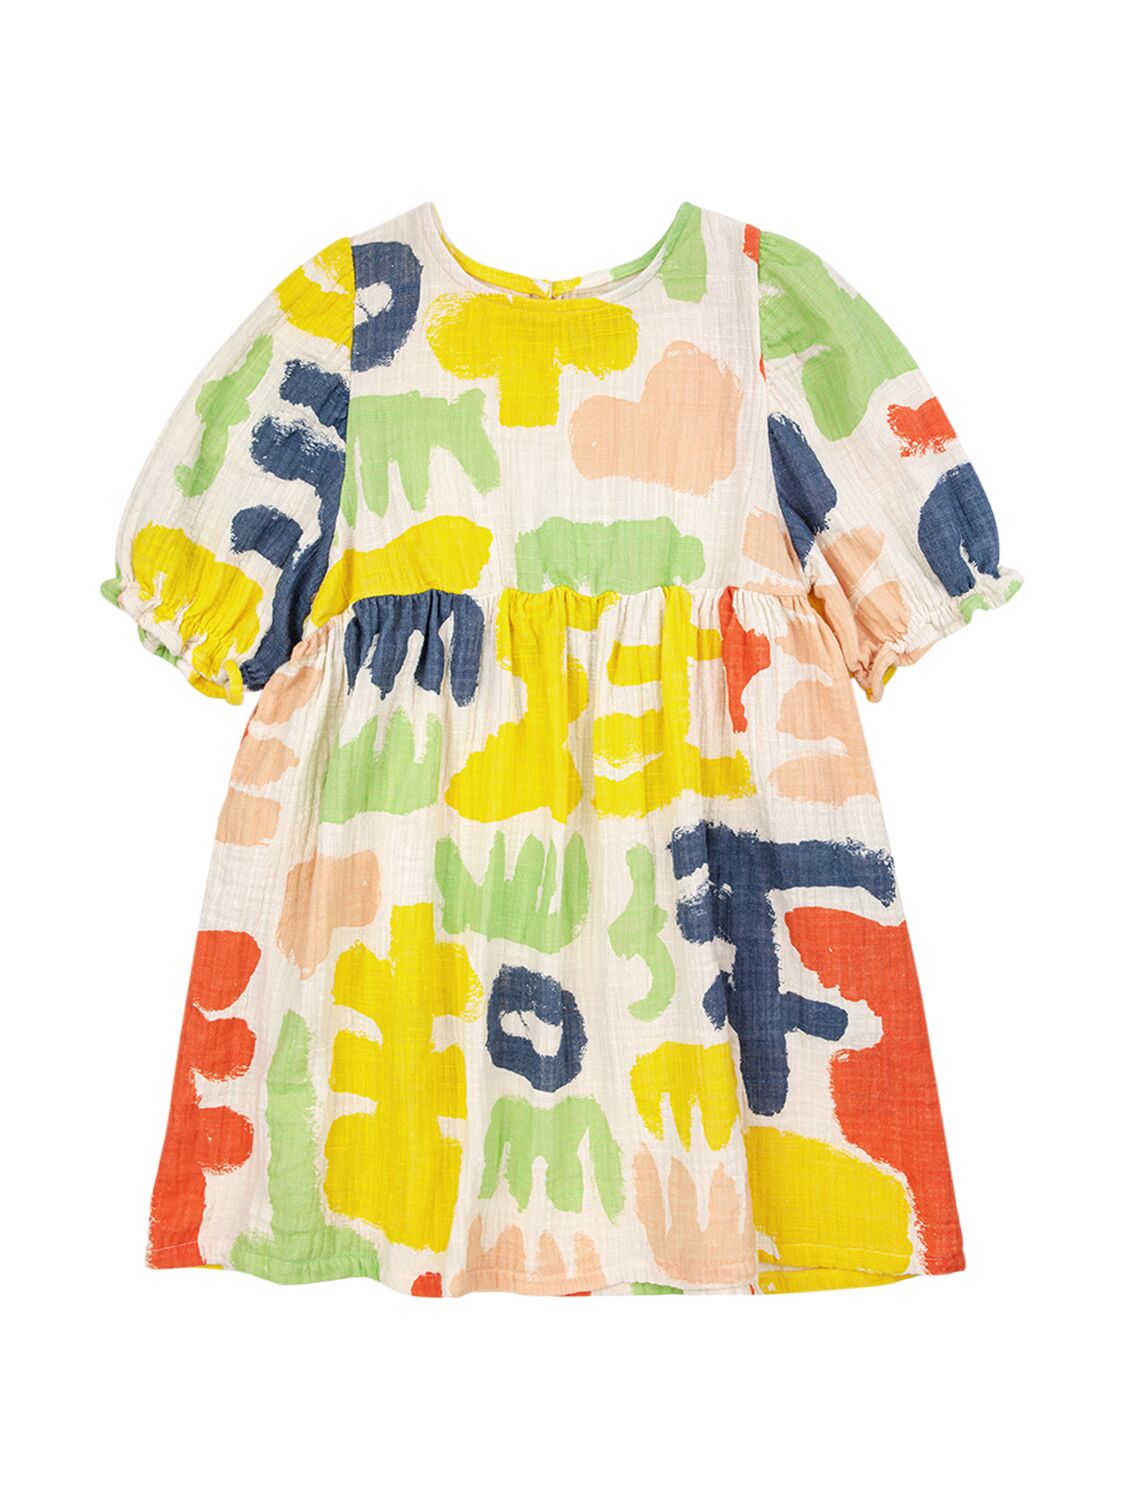 Bobo Choses Kids' Printed Cotton Dress In Offwhite